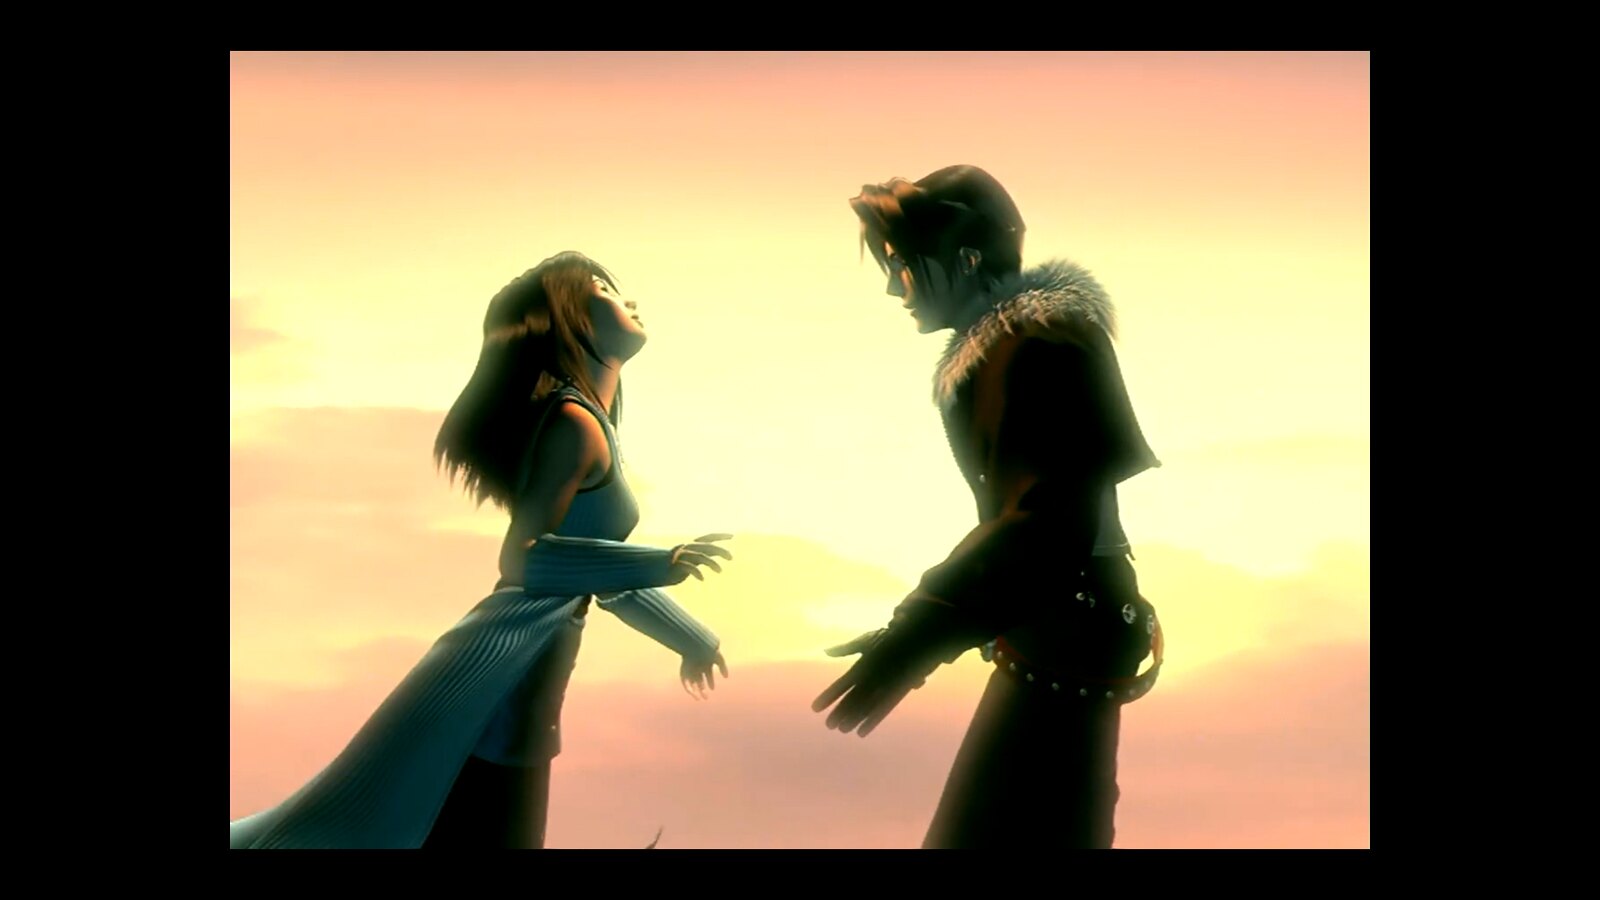 Final Fantasy VIII Remastered on PS4